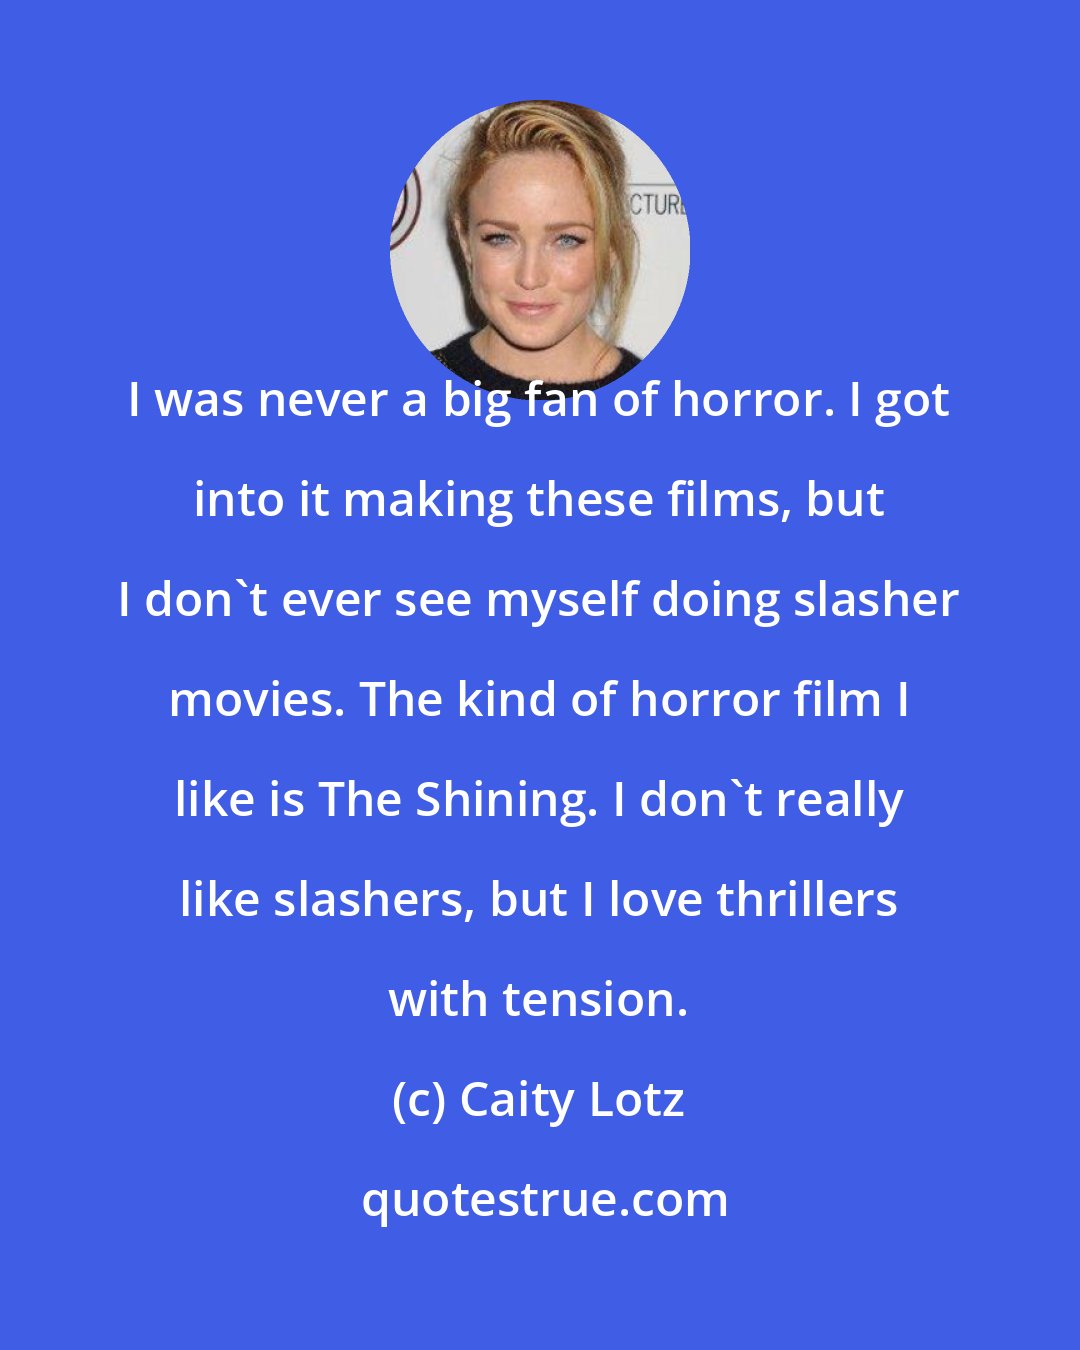 Caity Lotz: I was never a big fan of horror. I got into it making these films, but I don't ever see myself doing slasher movies. The kind of horror film I like is The Shining. I don't really like slashers, but I love thrillers with tension.